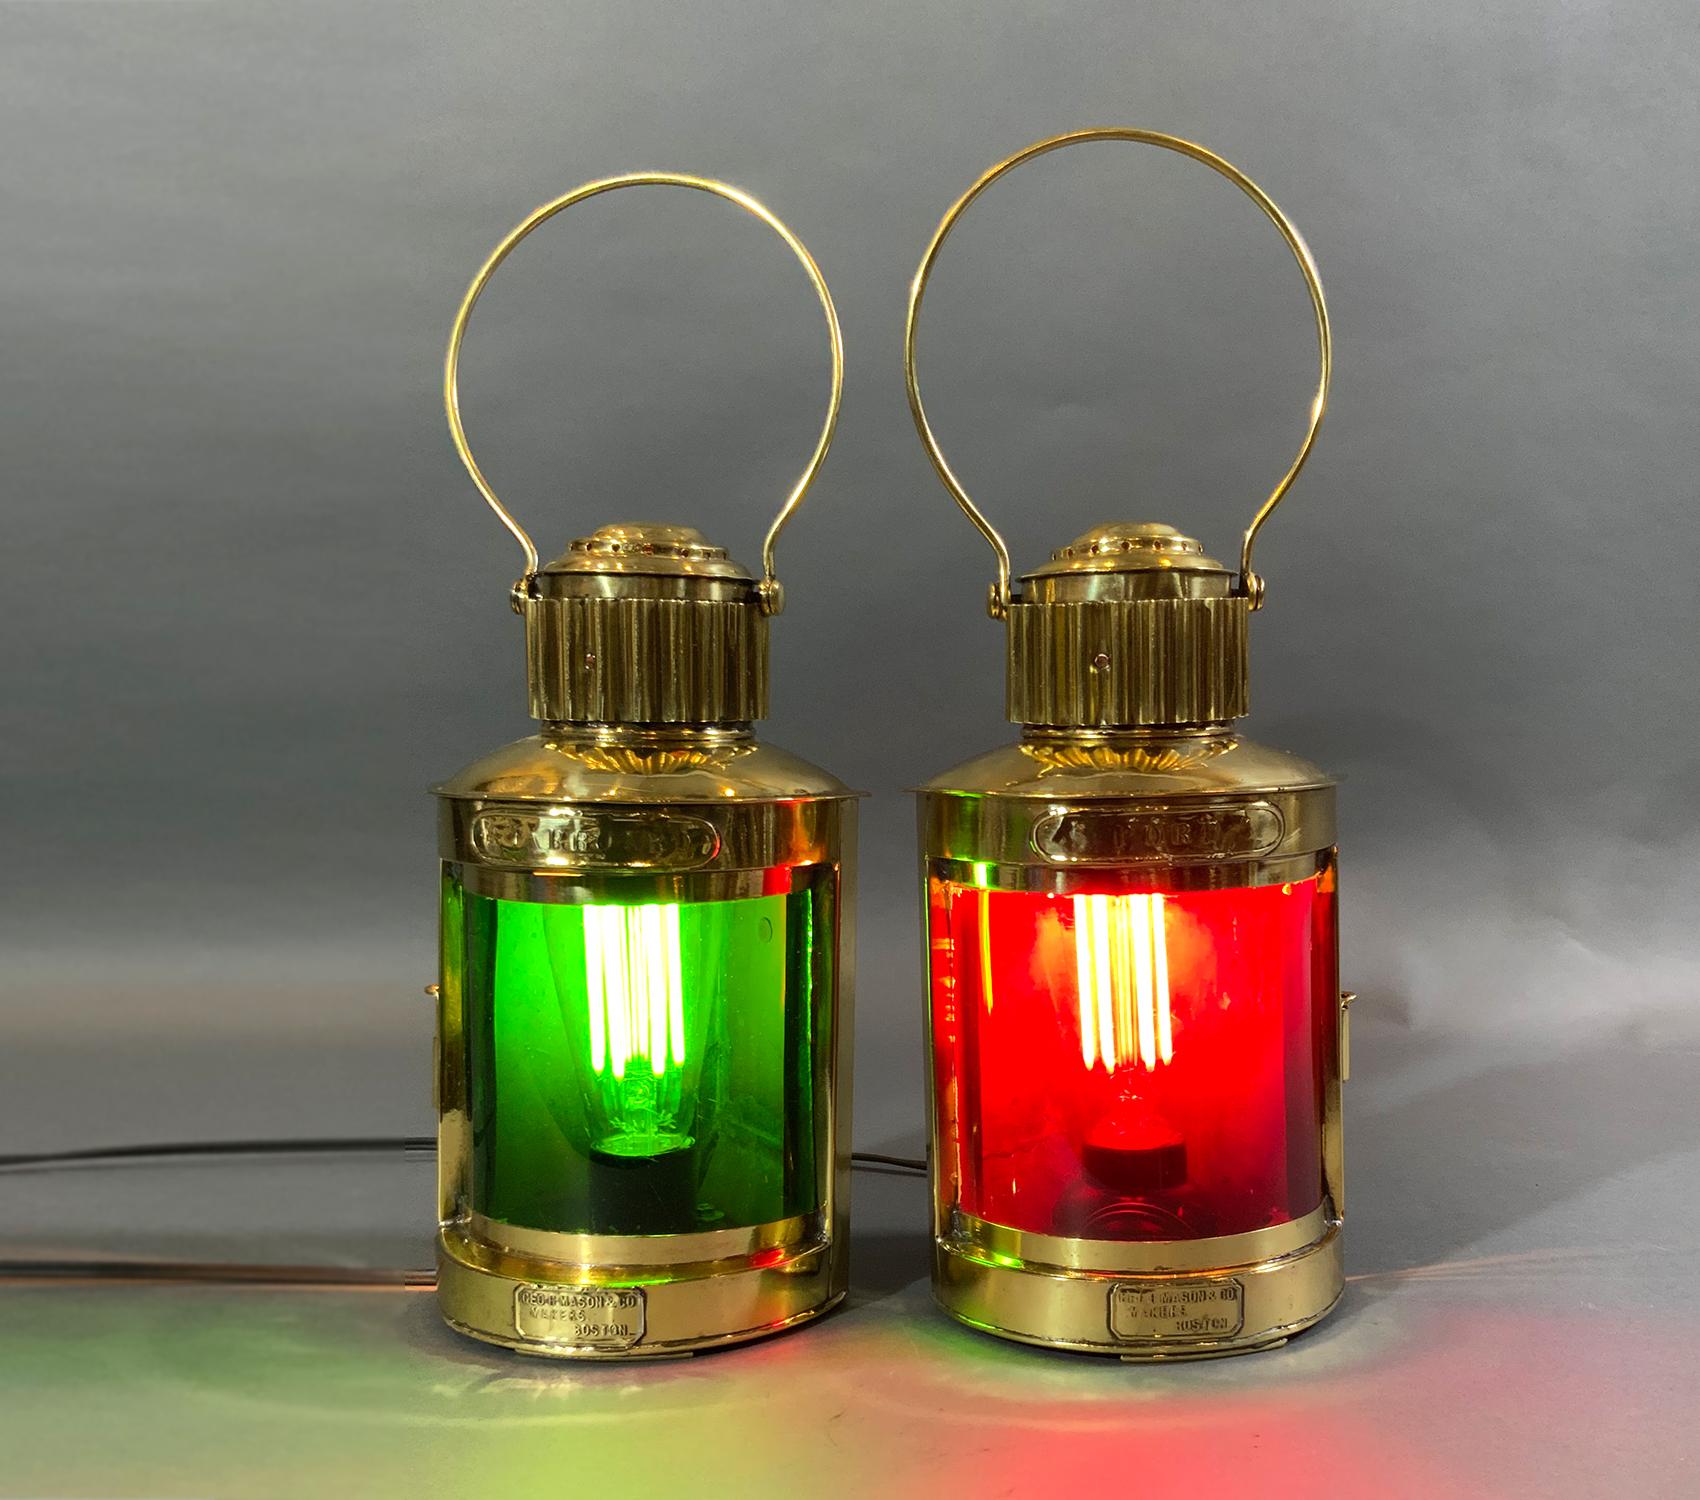 Awesome pair of meticulously polished and lacquered Nineteenth Century solid brass ships port and starboard lanterns. This is a rare delicate pair with original makers badges.

Weight: 2 LBS
Overall Dimensions: 10” H x 6” L x 6” D
Made: